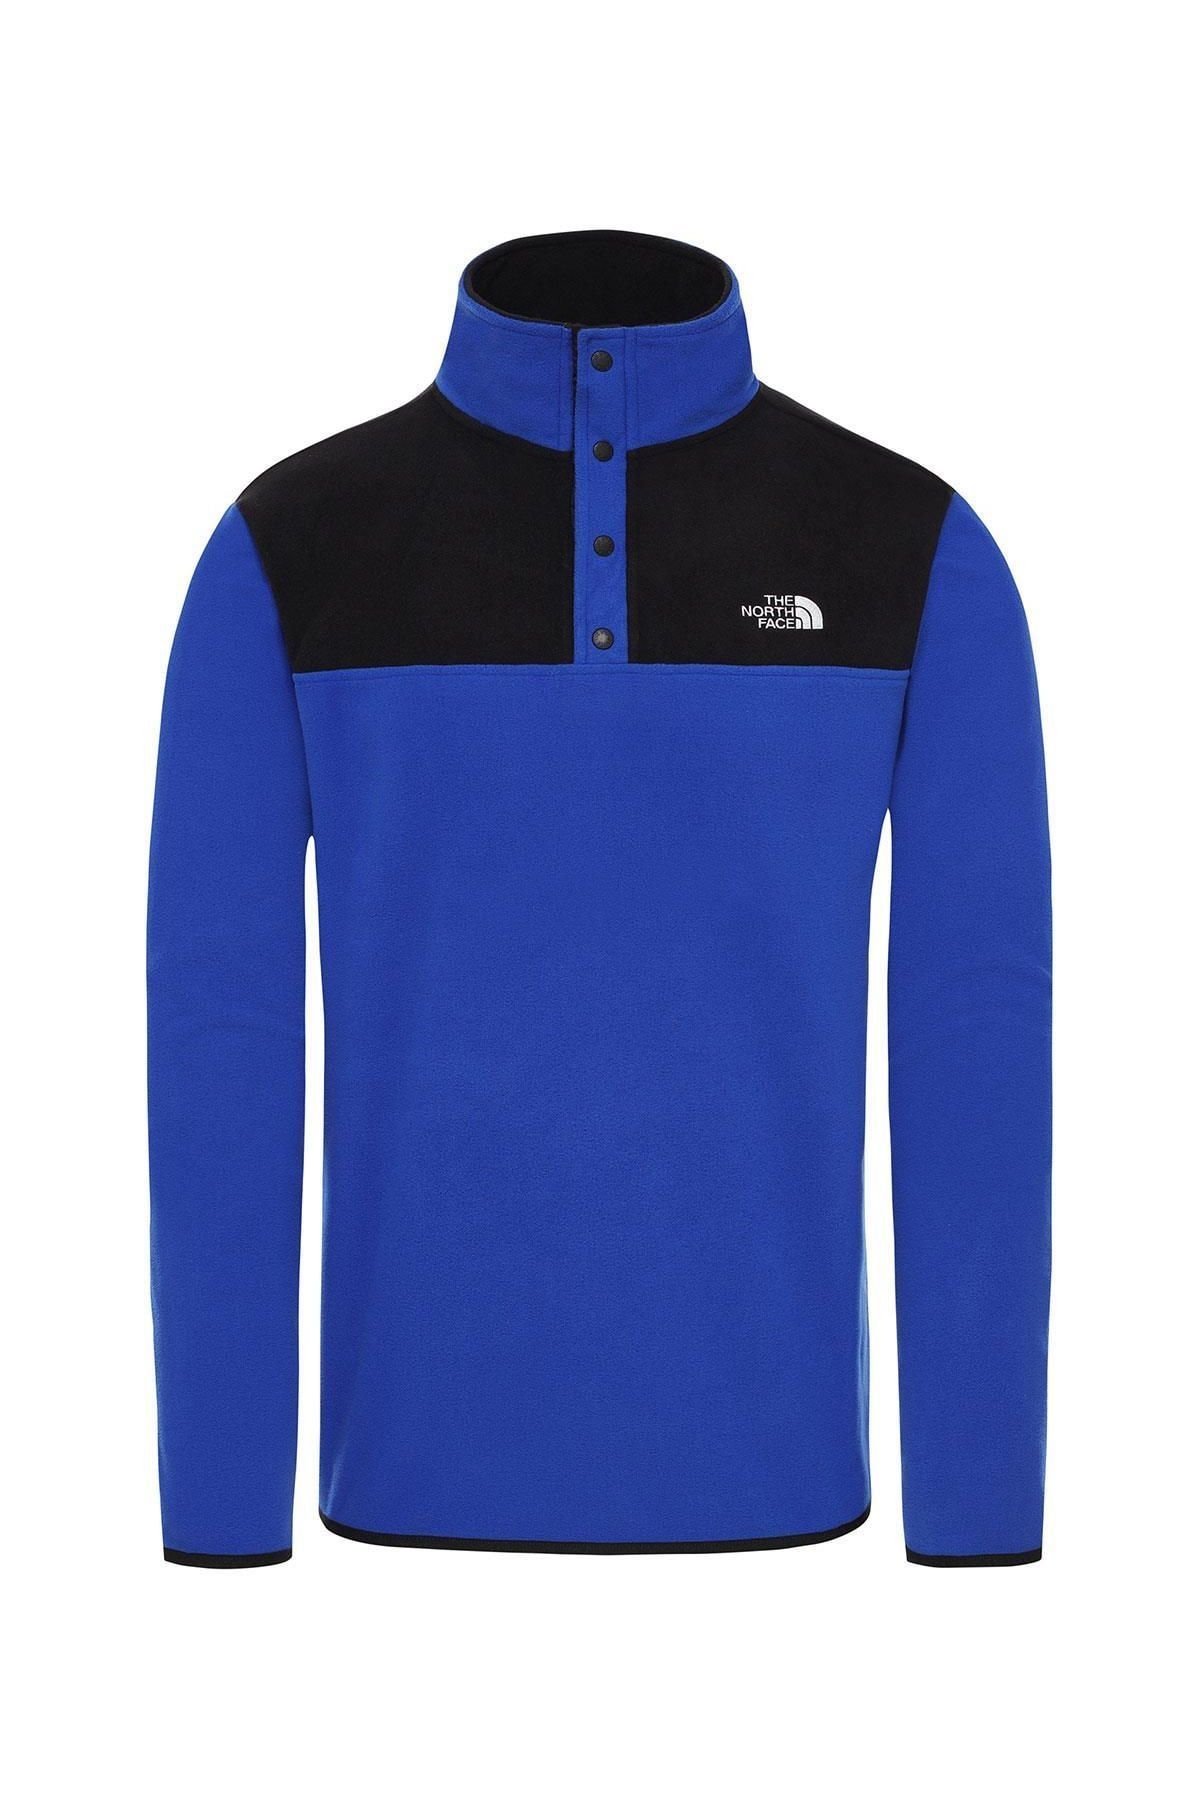 The North Face M Tkaglcr Snpnk Po Nf0A4Ajdef11